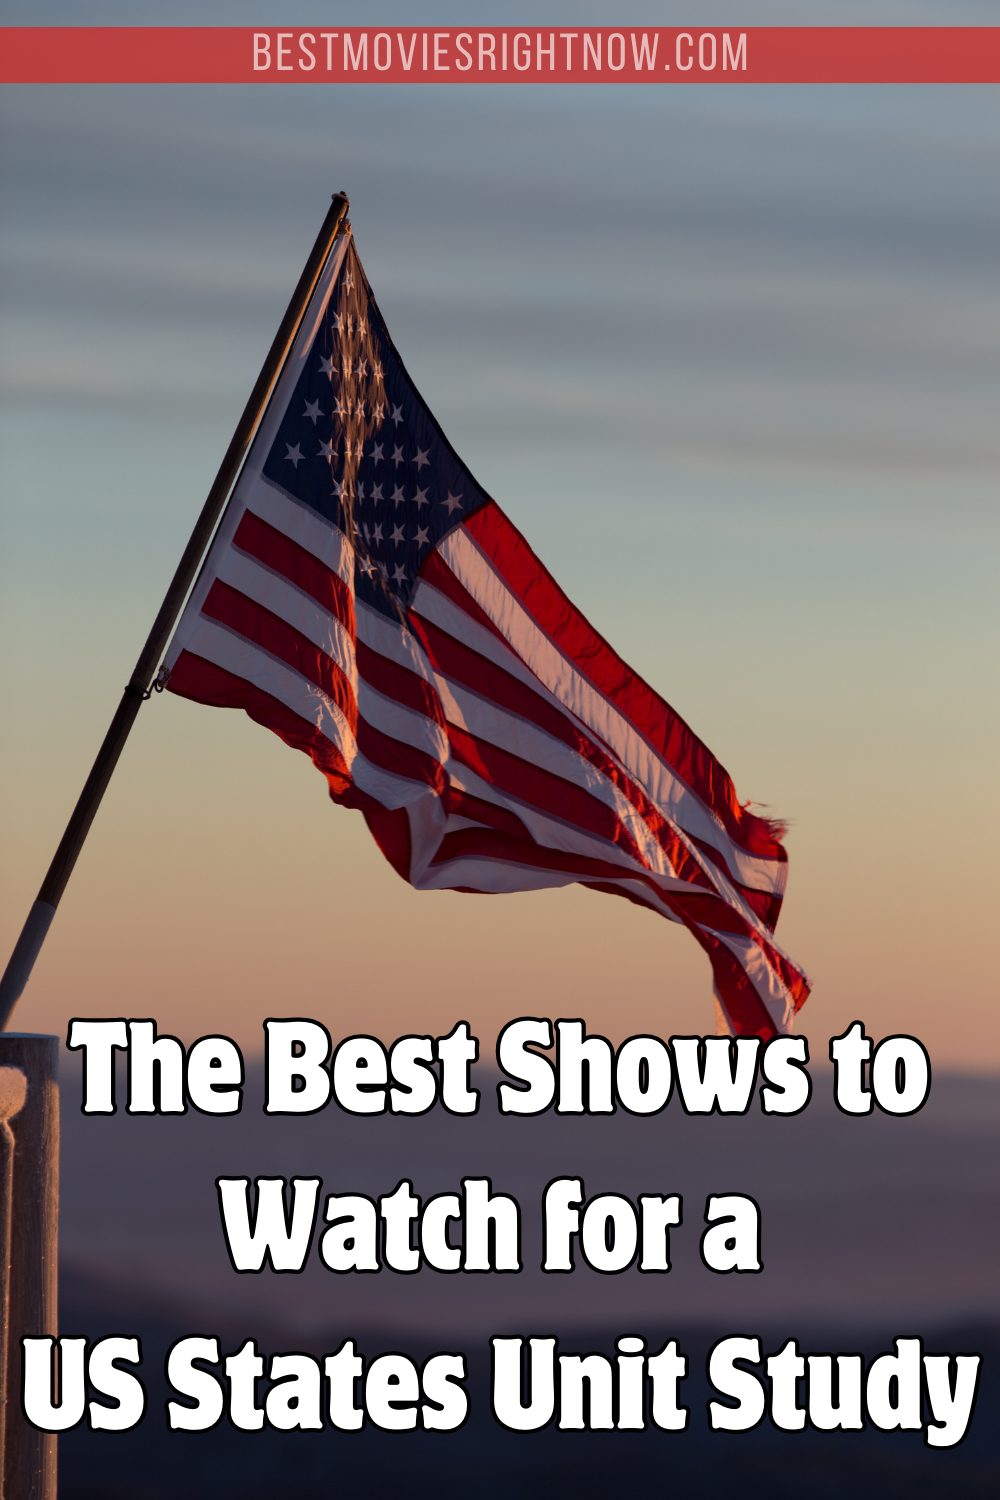 US Flag with text "The Best Shows to Watch for a US States Unit Study"